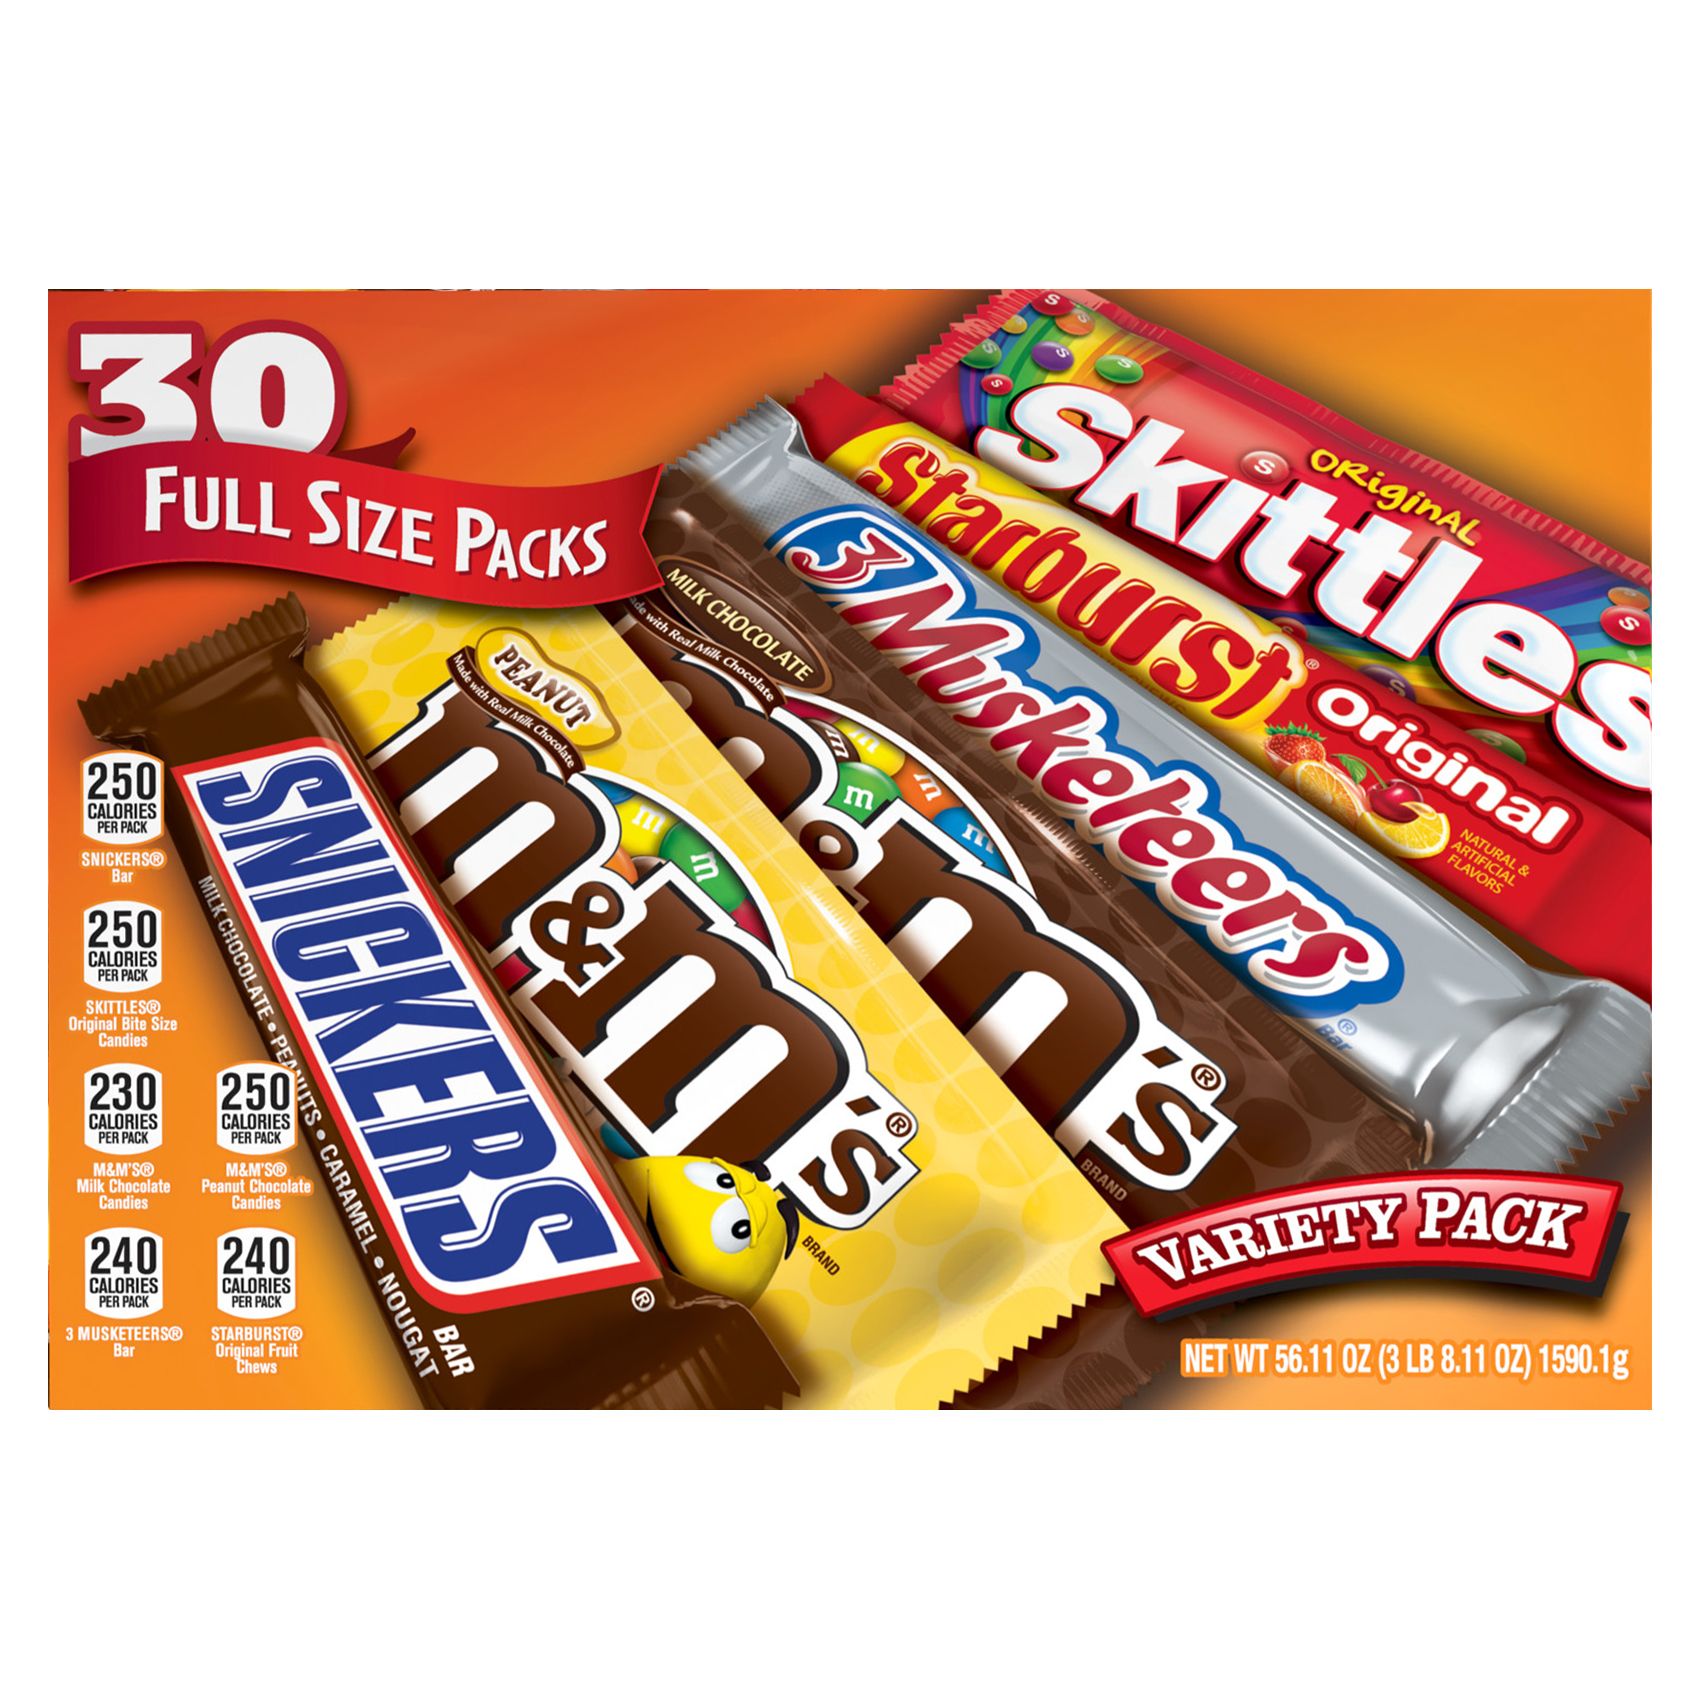 SNICKERS Minis Size Milk Chocolate Candy Bars Bulk Pack, Party Size, 40 oz  Bag